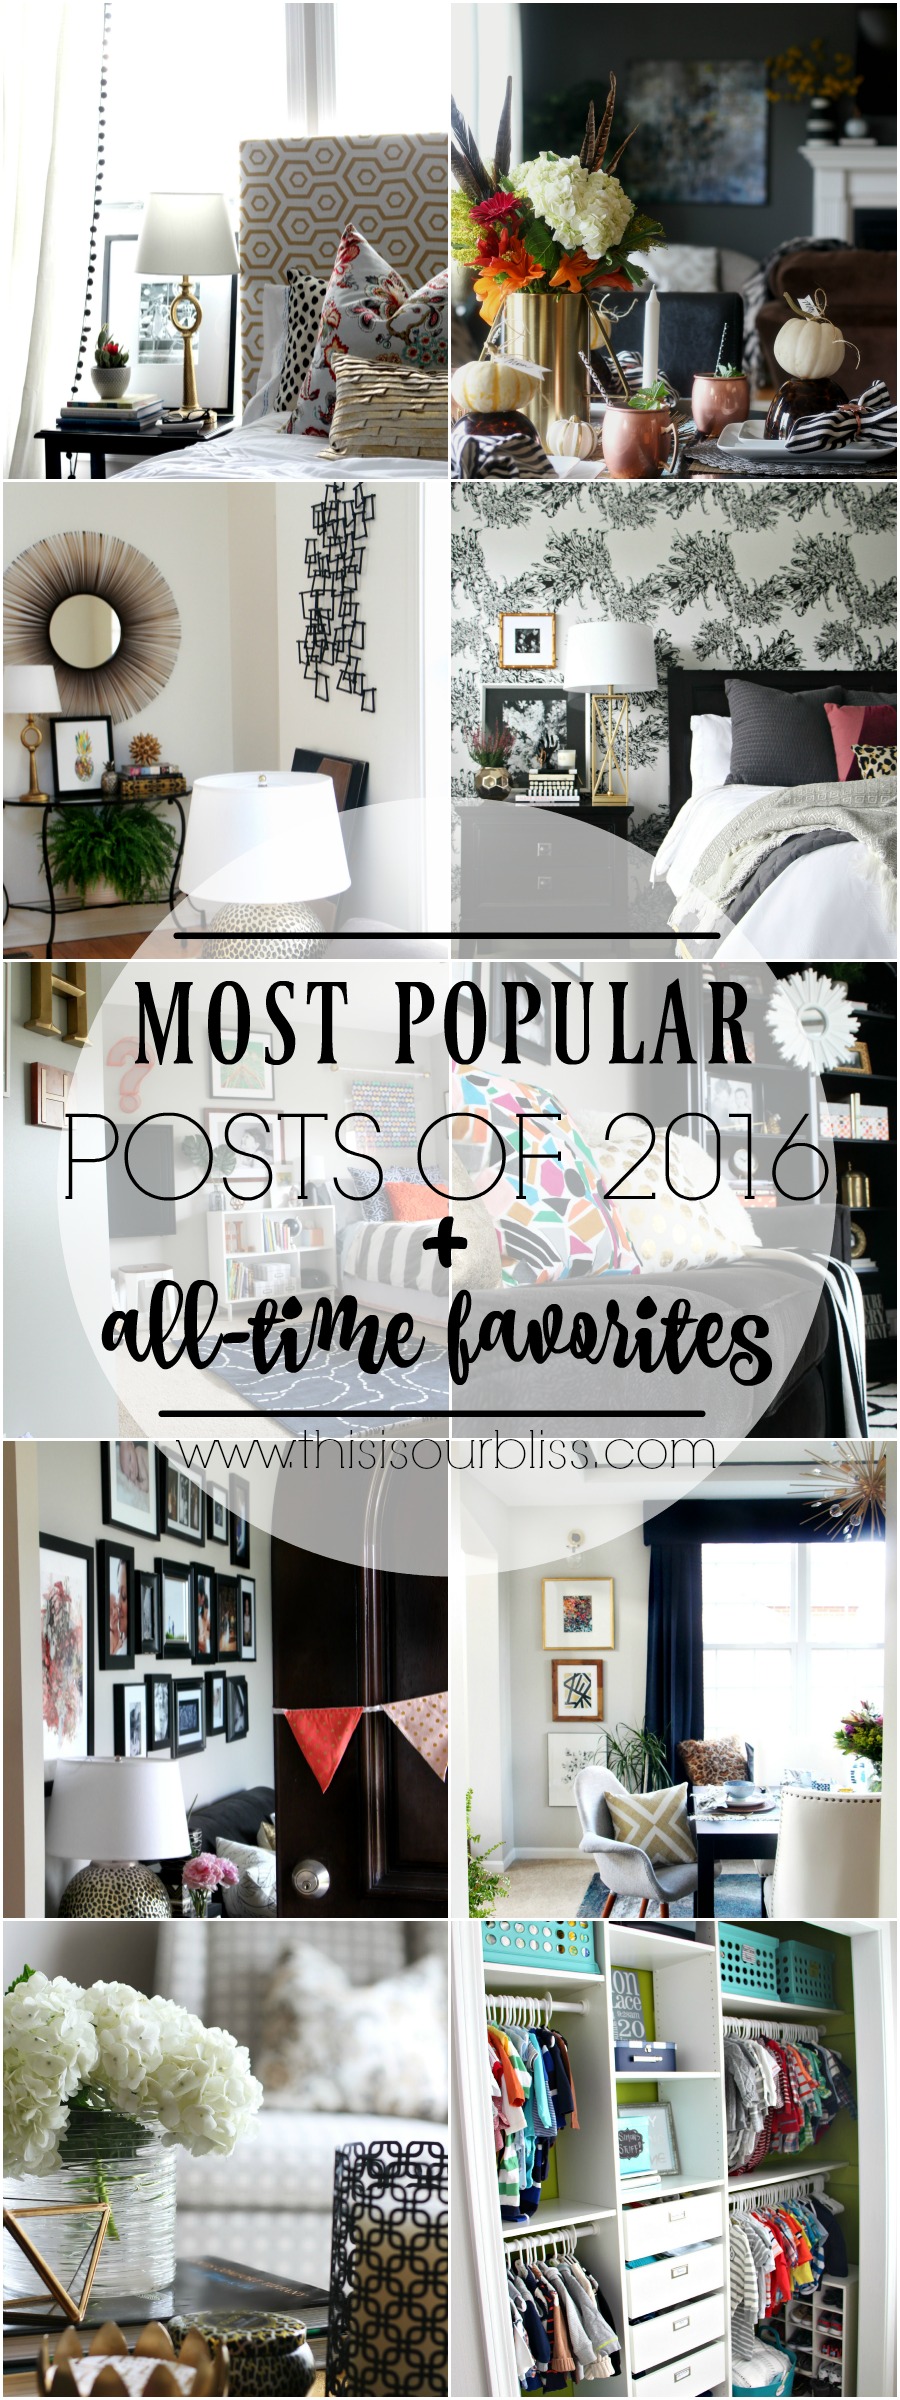 Most Popular Posts of 2016 plus All-time Favorites from This is our Bliss | www.thisisourbliss.com